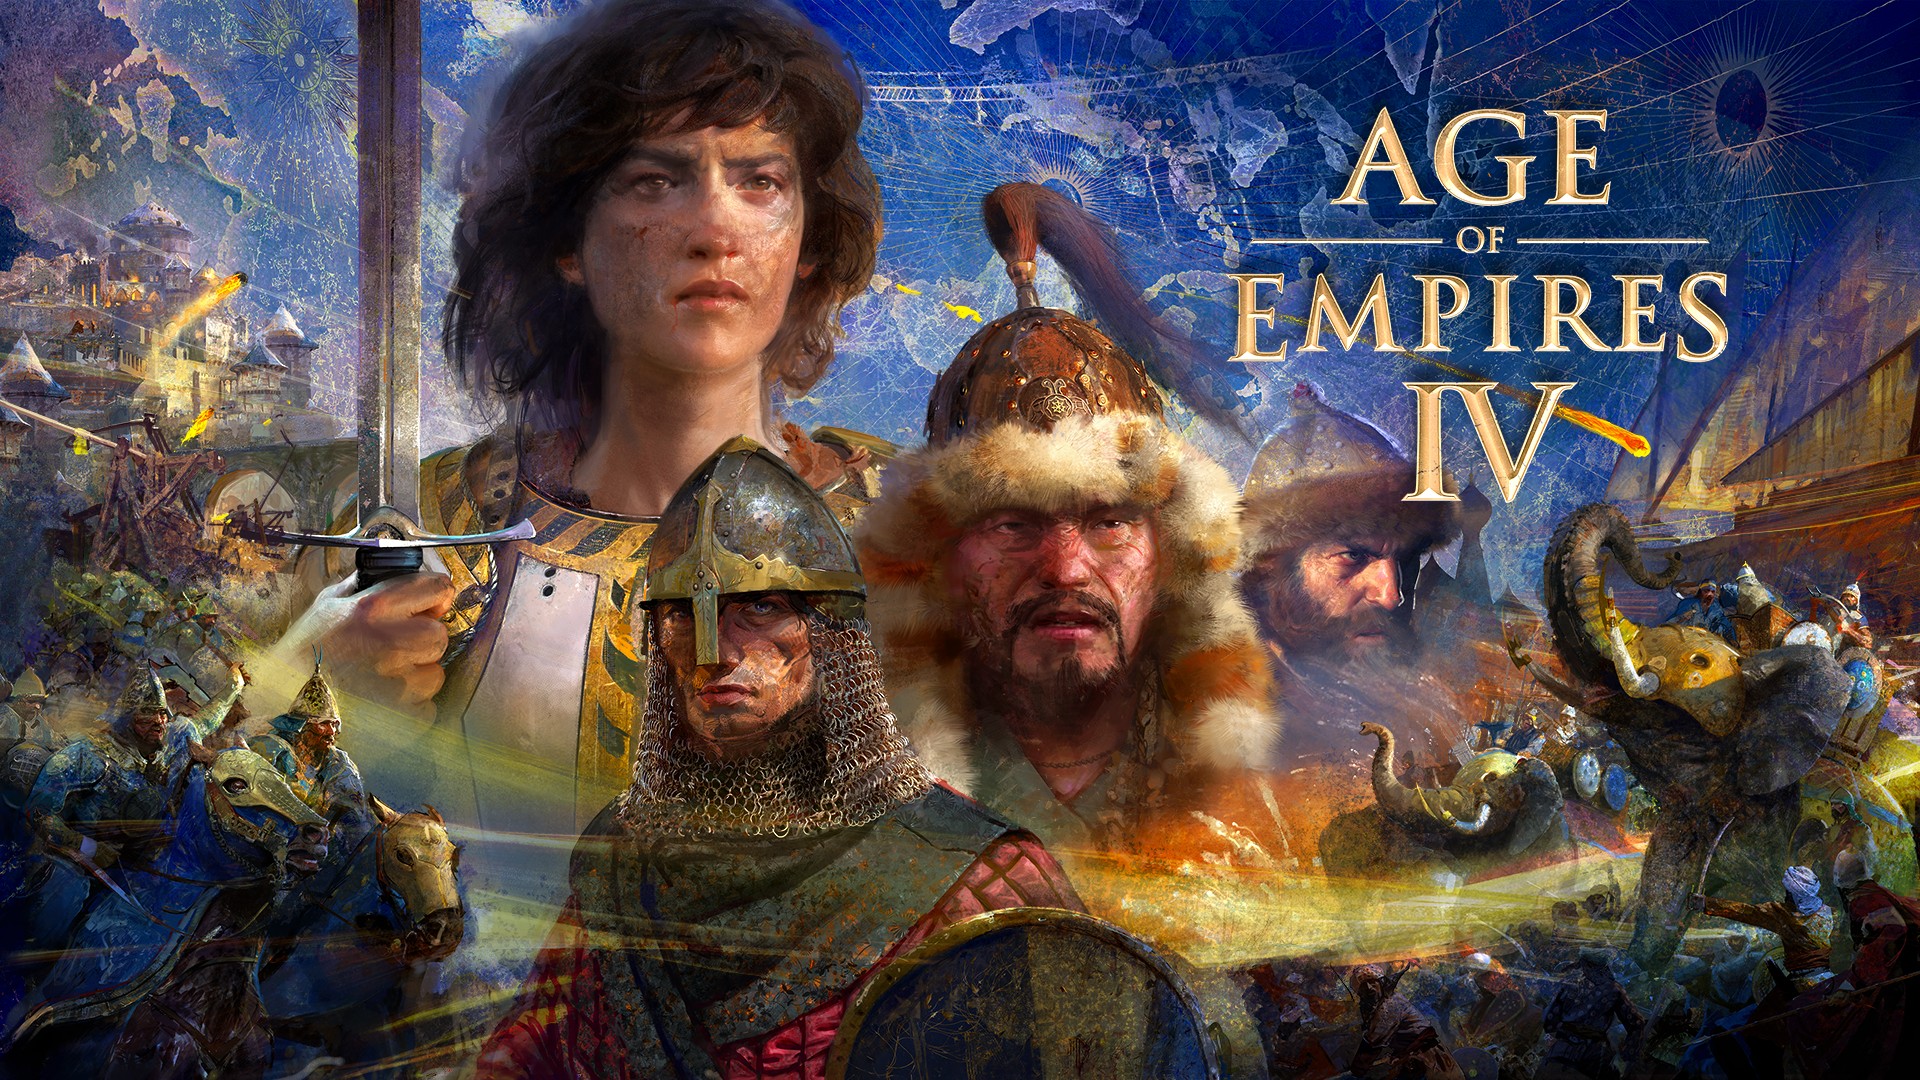 Video For Age of Empires IV is Available Now with Xbox Game Pass on PC